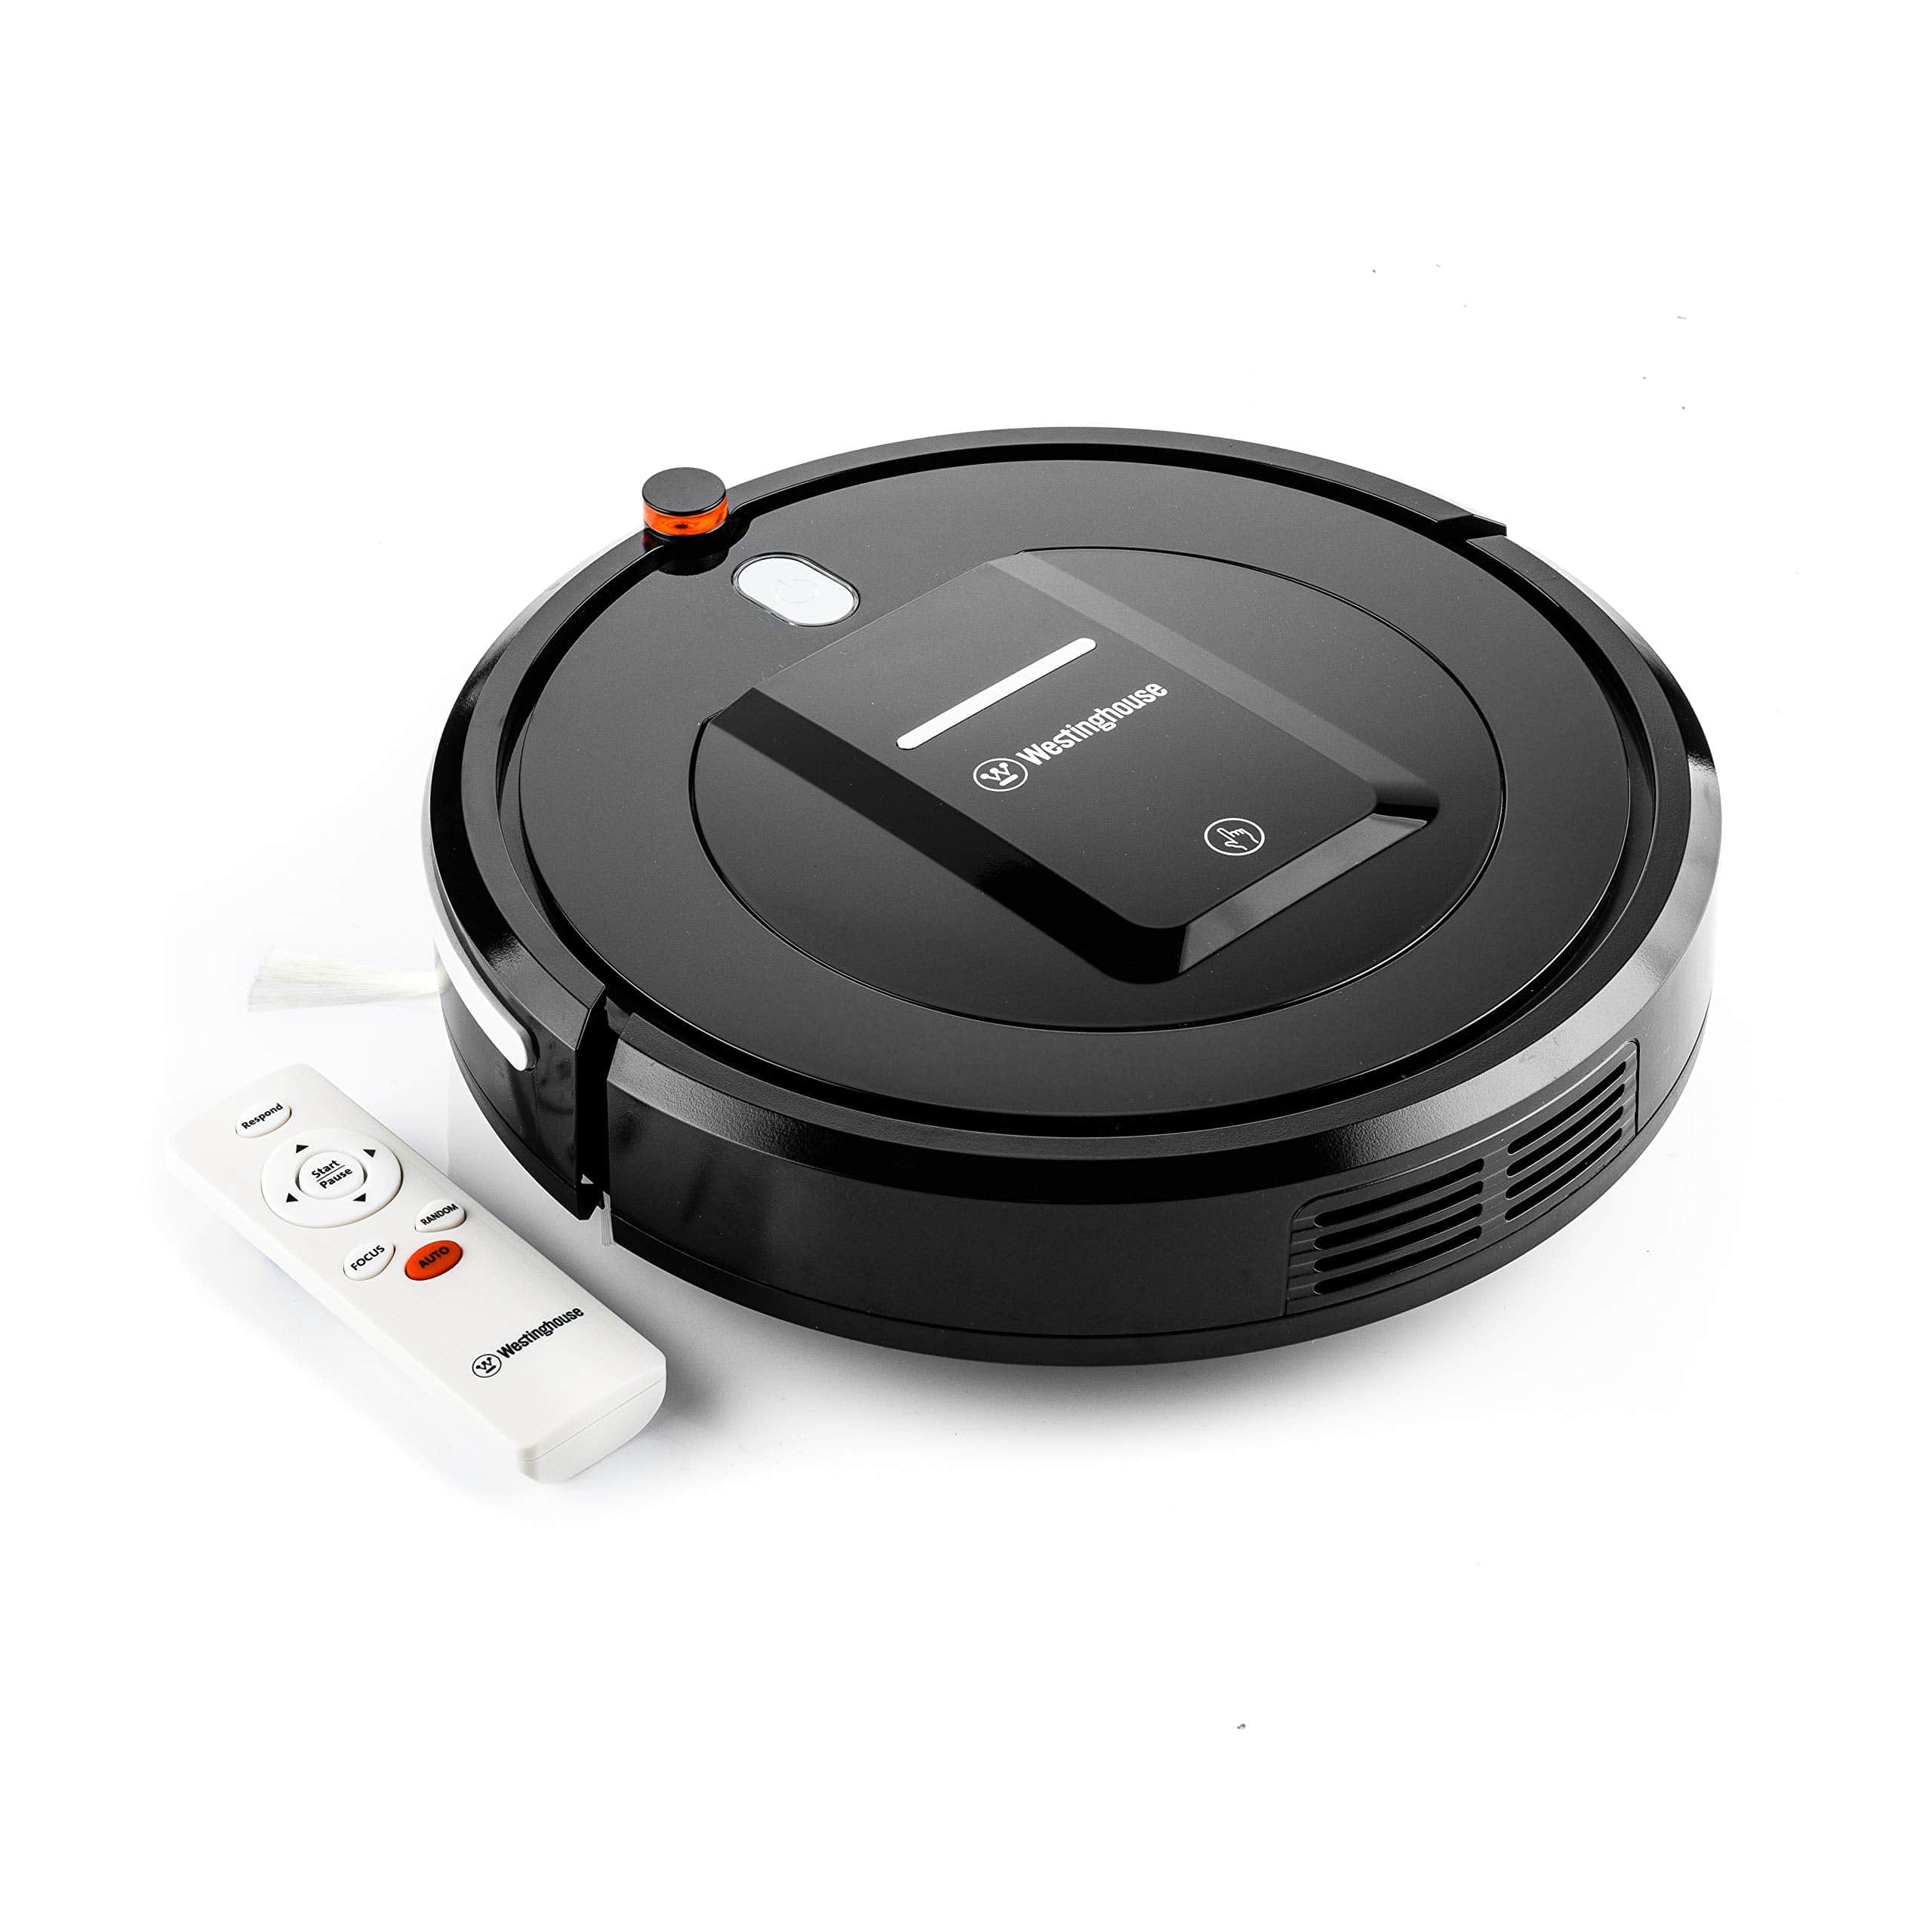 Westinghouse Robotic Vacuum Cleaner - WFVCR290BK | Supply Master | Accra, Ghana Steam & Vacuum Cleaner Buy Tools hardware Building materials